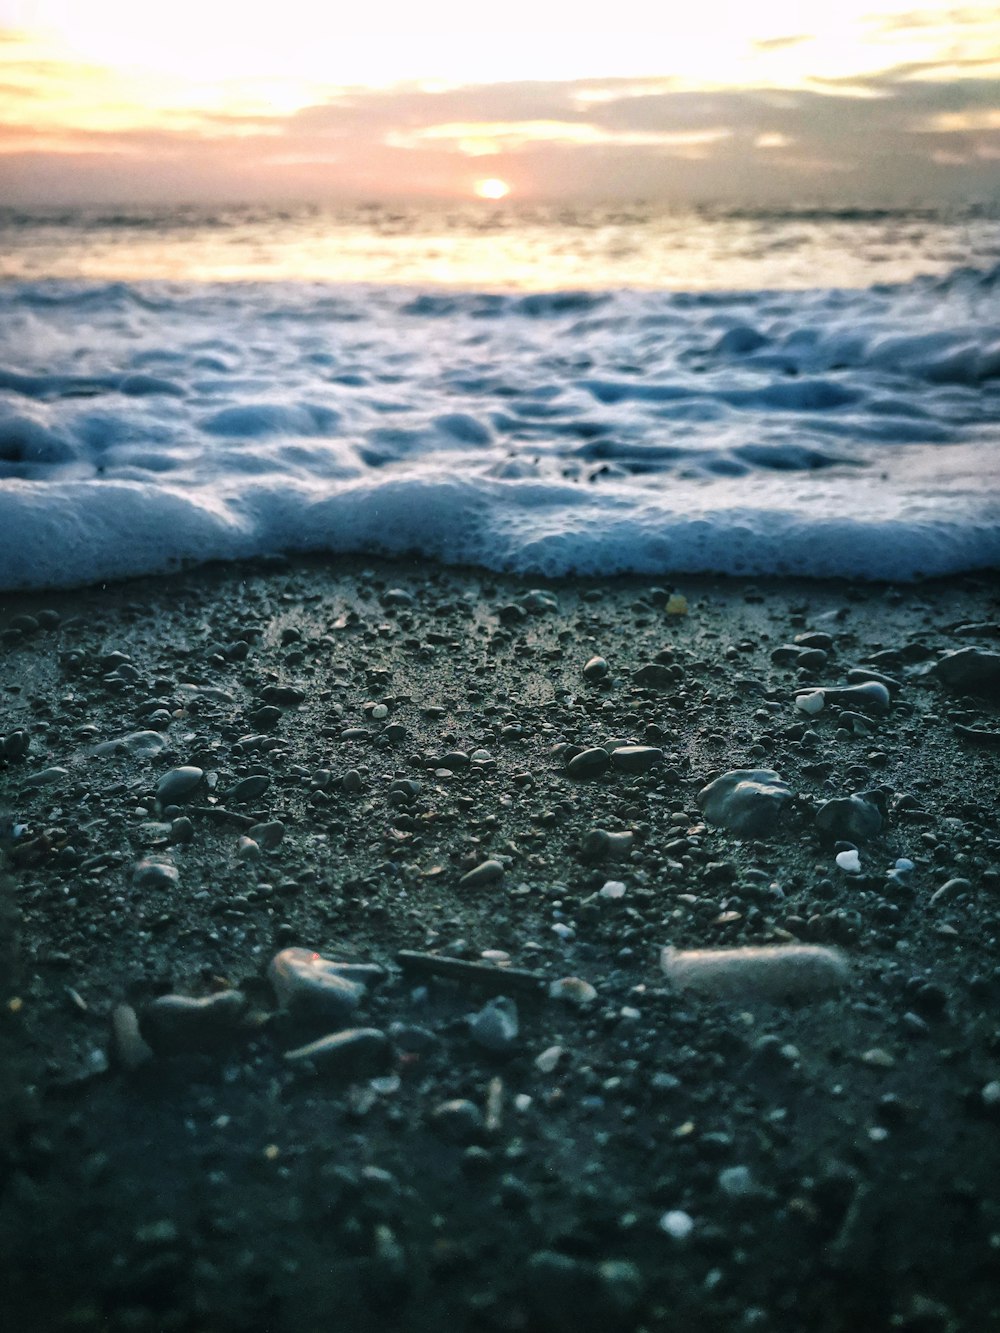 water waves on gray sand during sunset